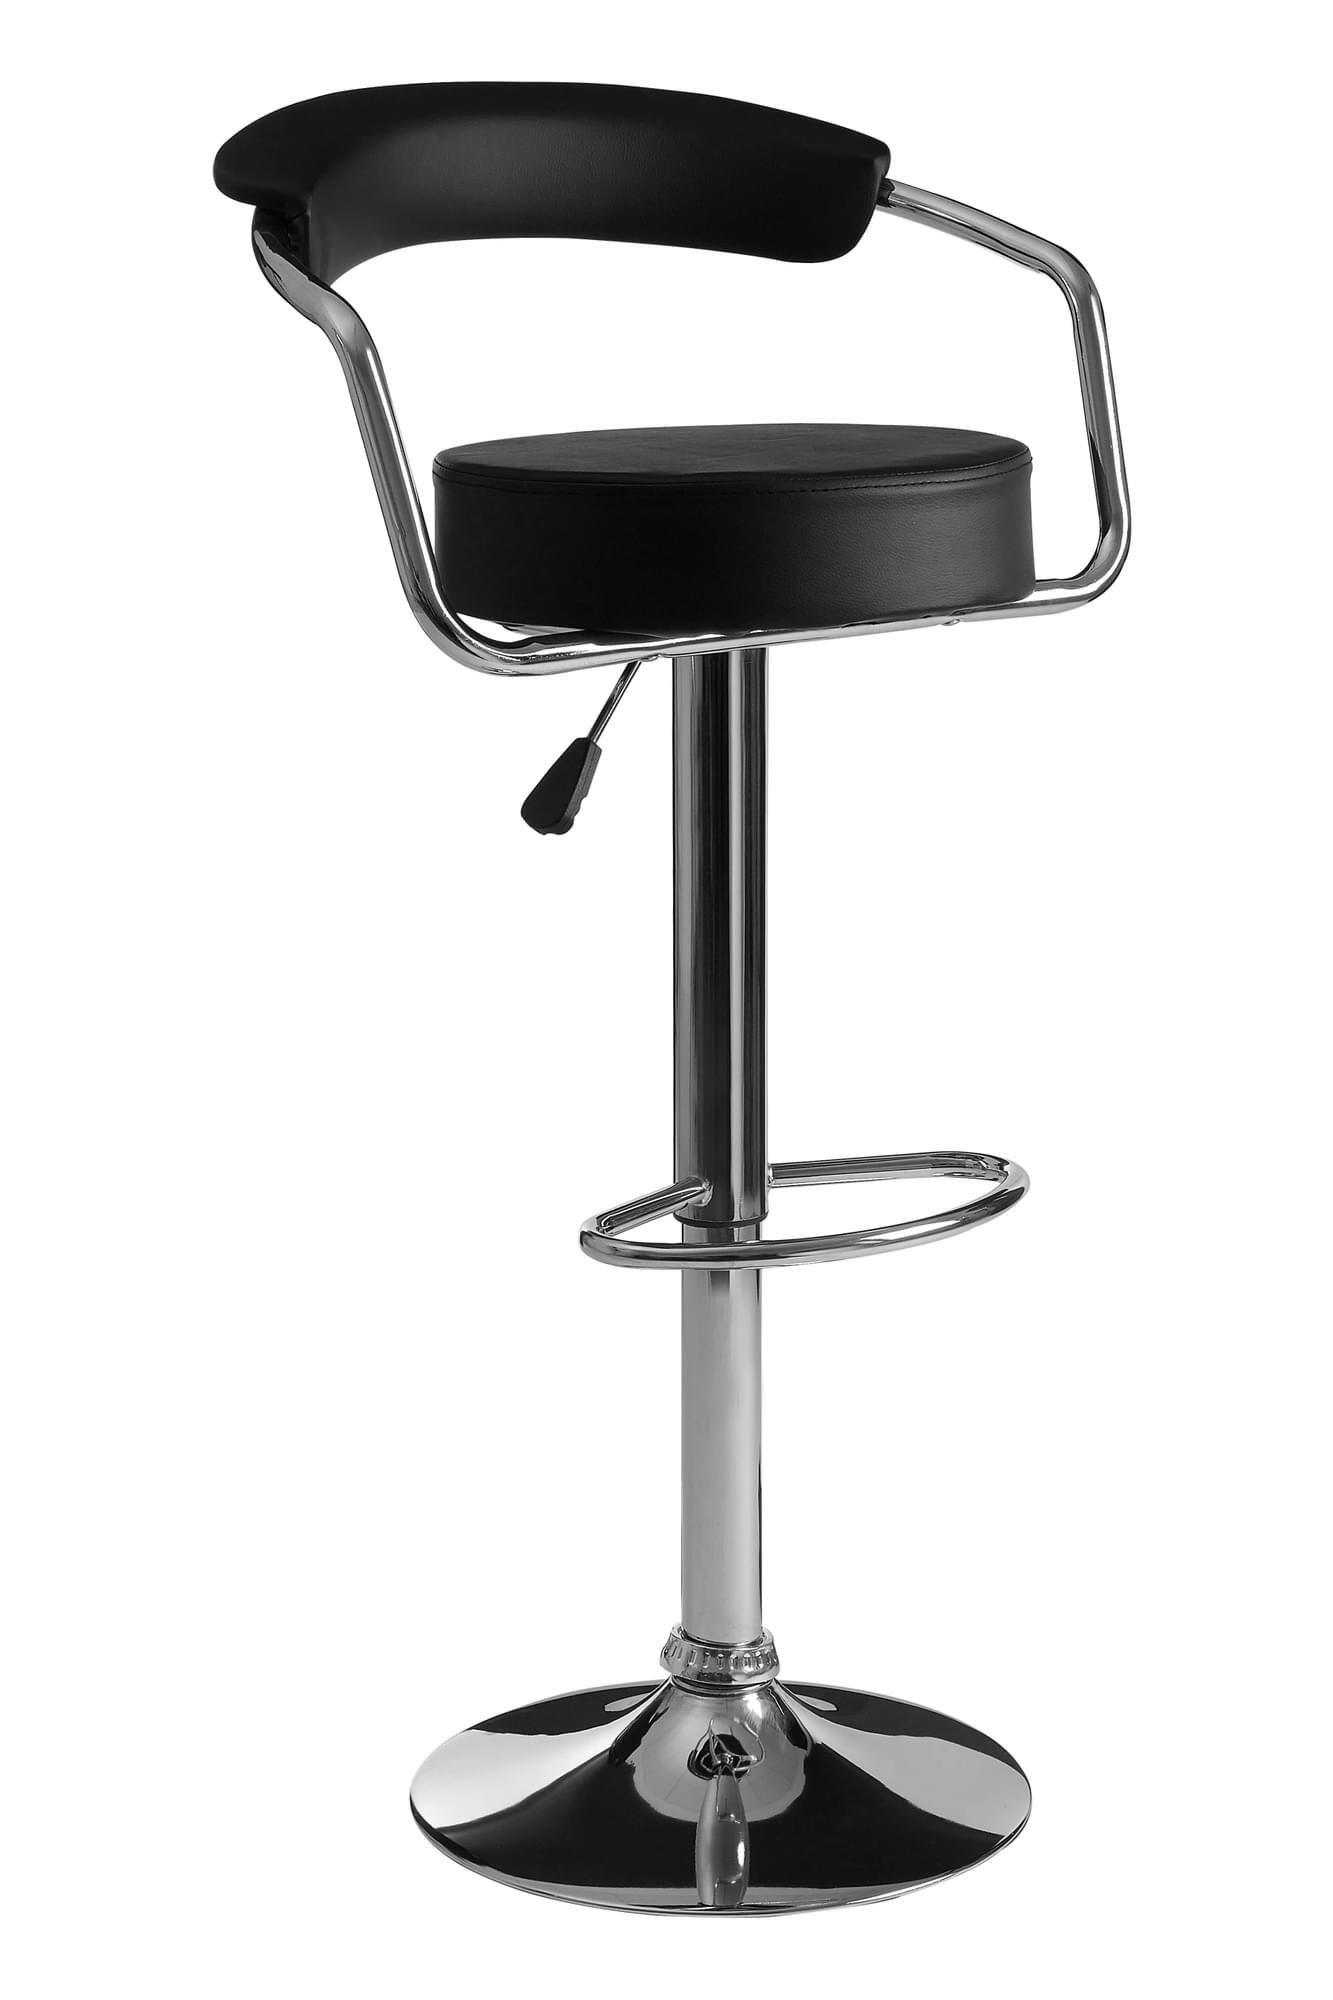 Interiors by Premier Scala Black Leather Effect Bar Chair